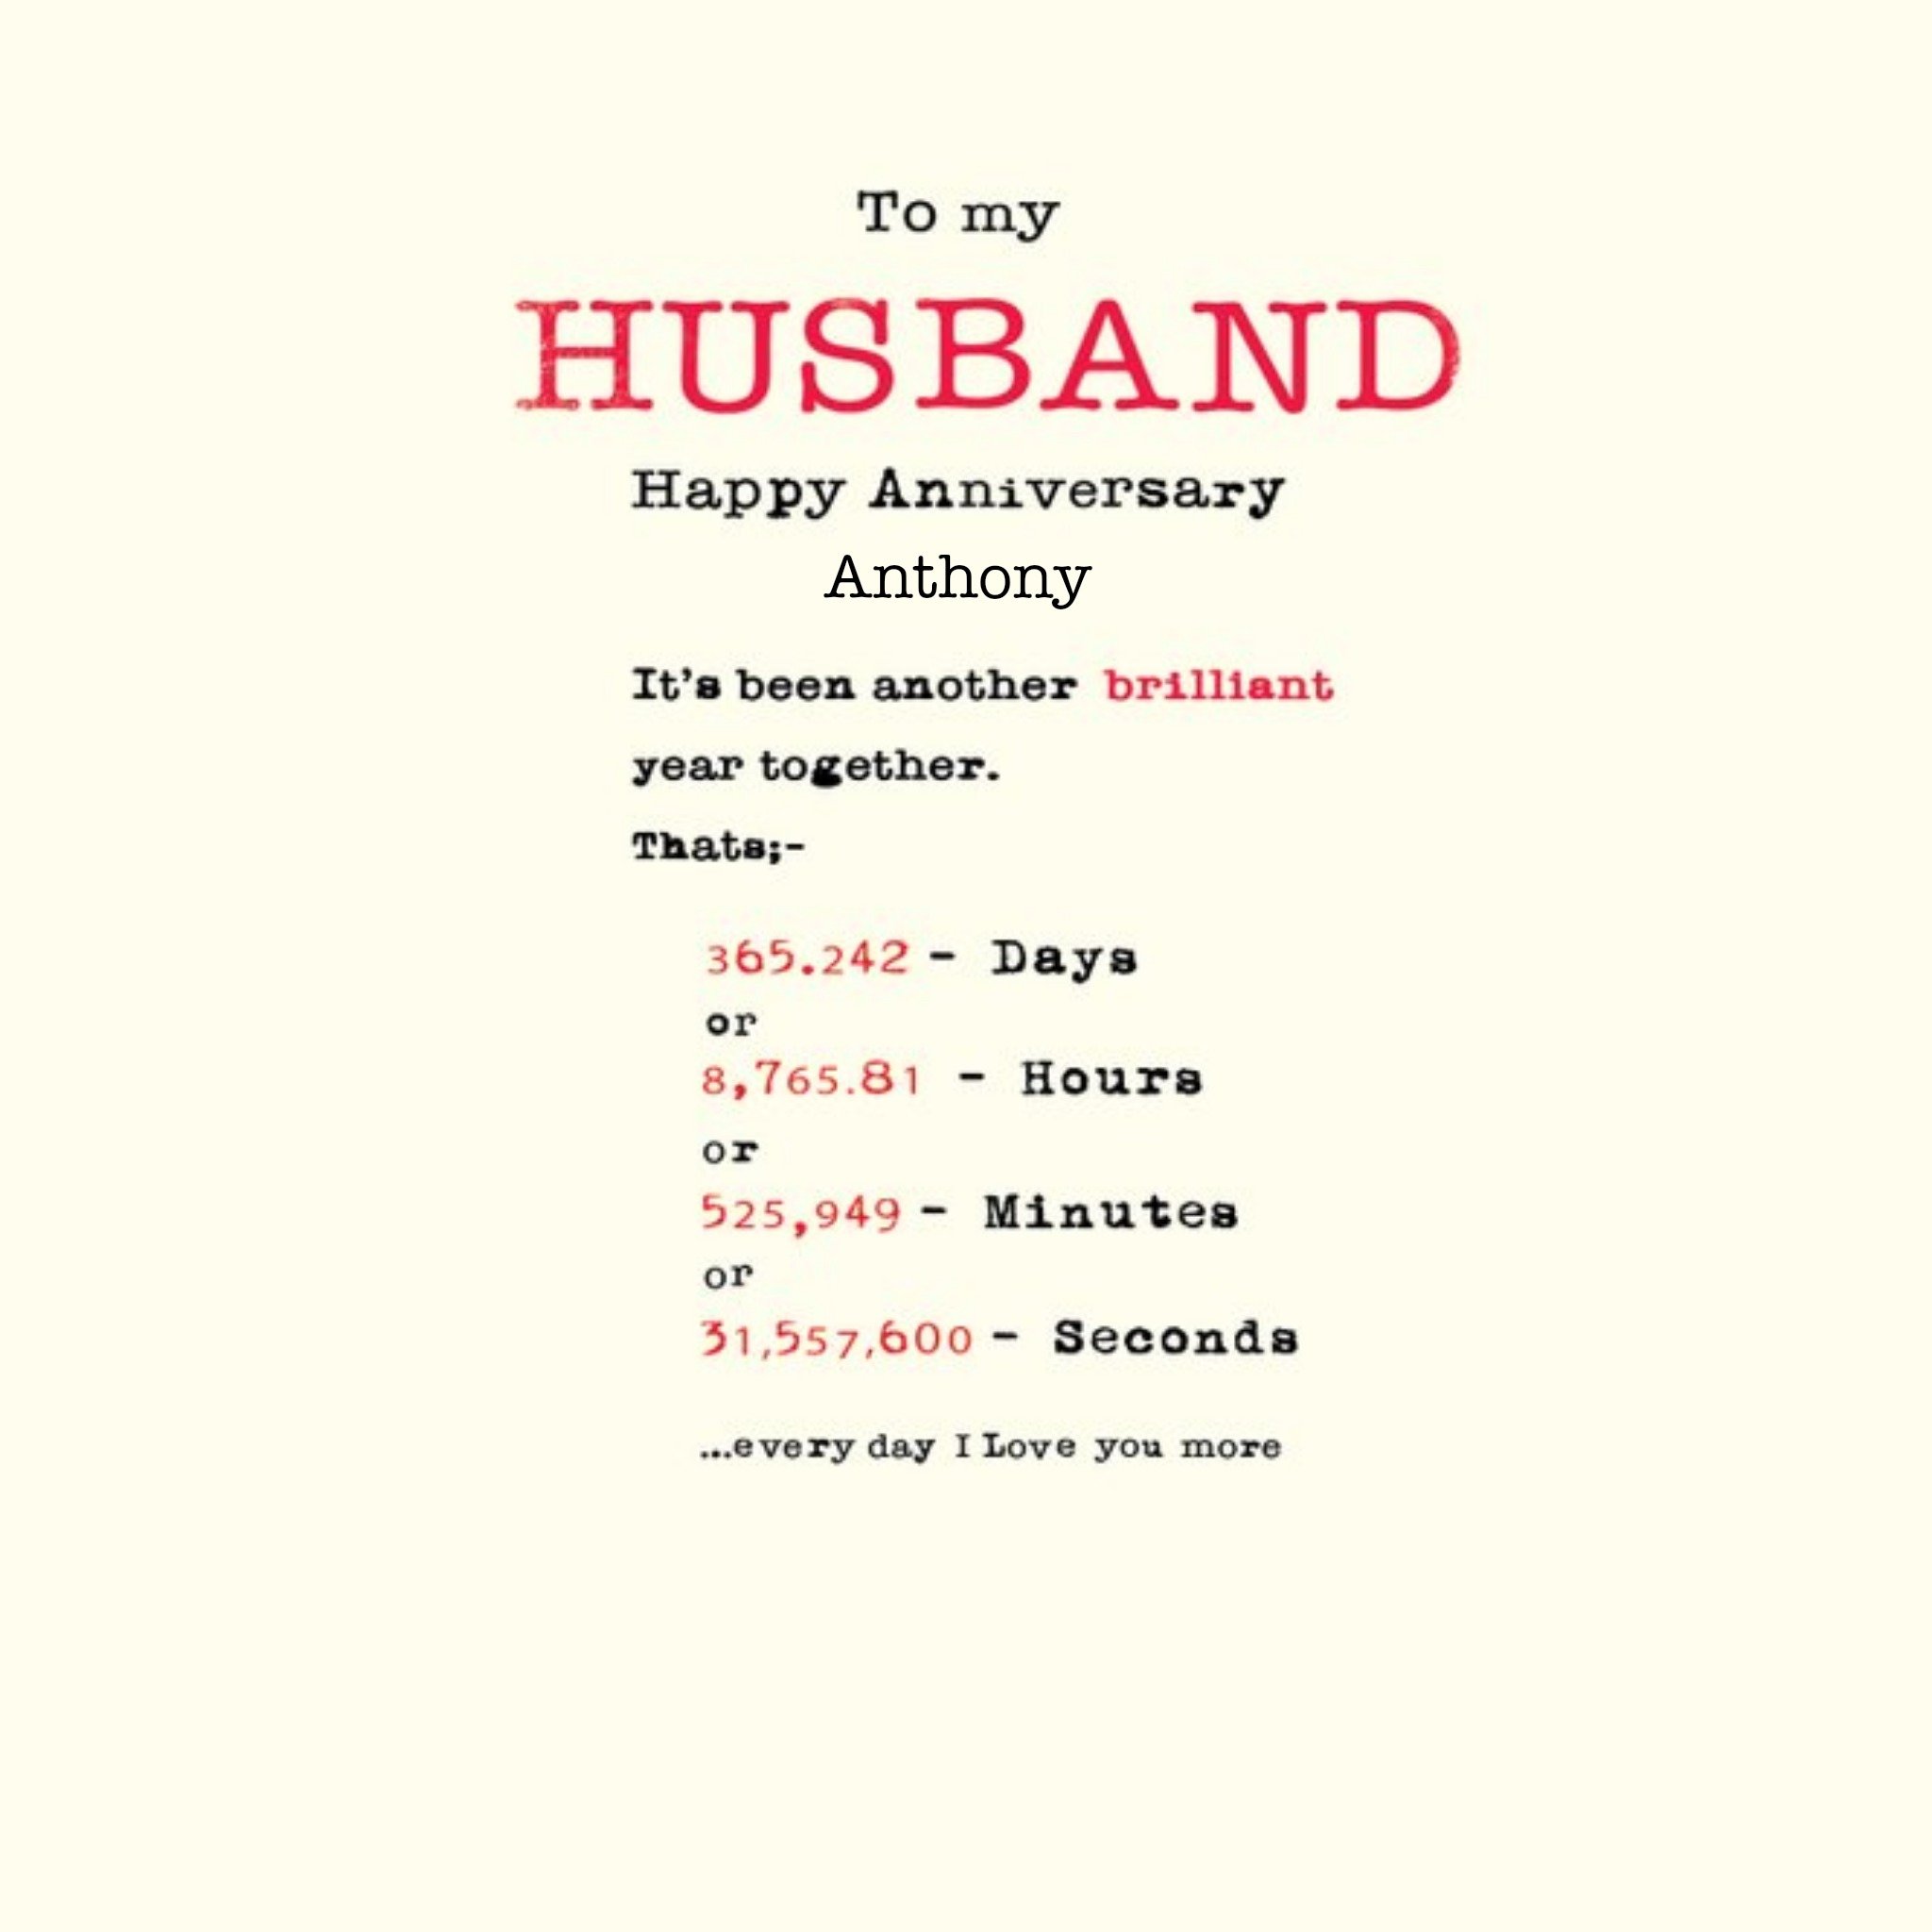 Moonpig Days And Hours Personalised Anniversary Card For Husband, Large